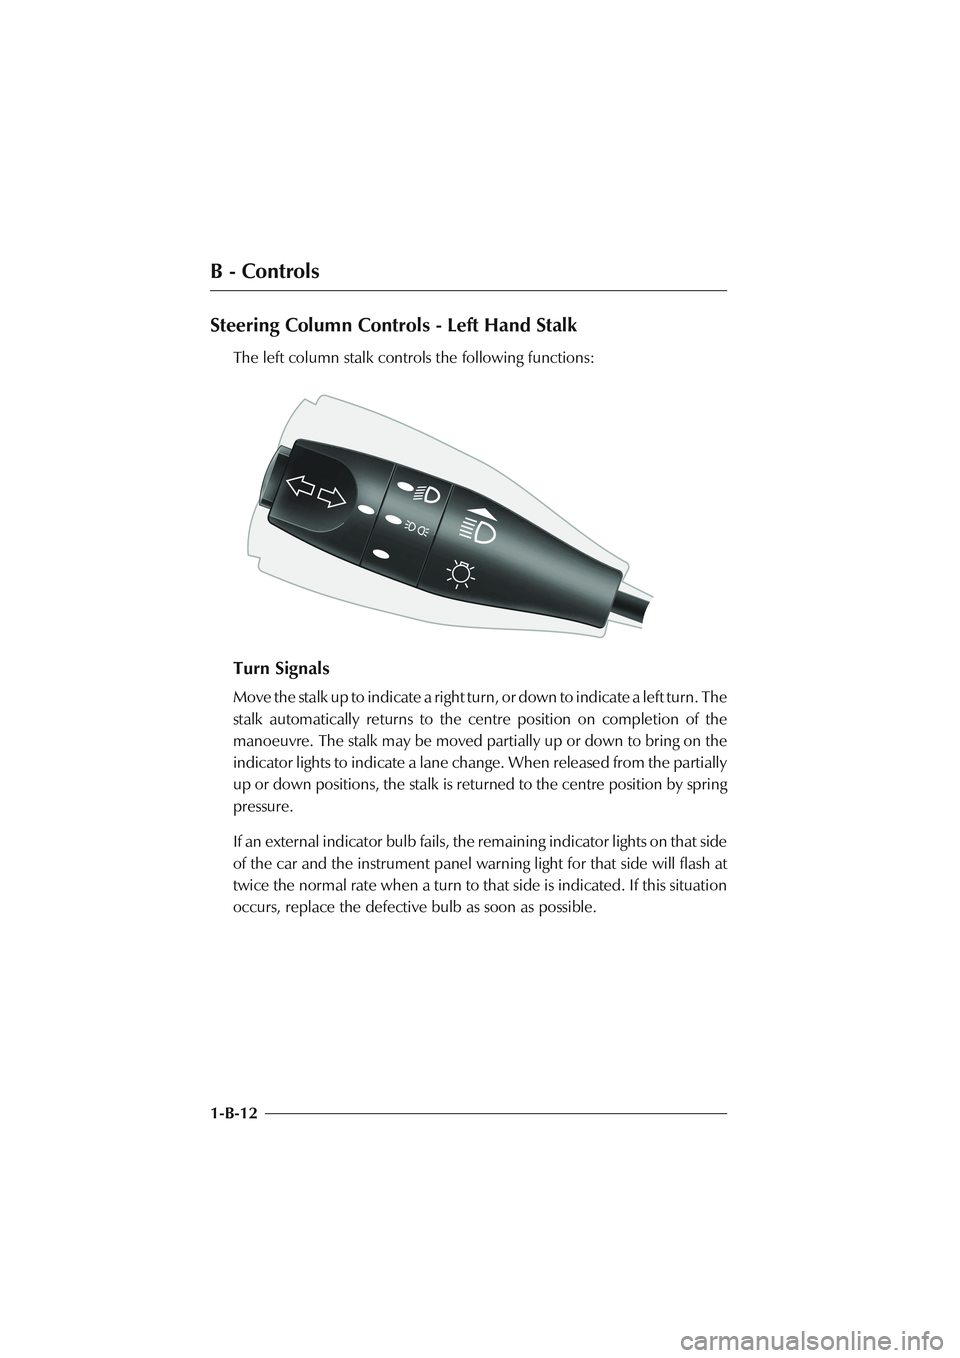 ASTON MARTIN DB AR1 Q 2003  Owners Guide B - Controls
1-B-12
Steering Column Controls - Left Hand Stalk
The left column stalk controls the following functions:
Turn Signals
Move the stalk up to indicate a right turn, or down to indicate a le